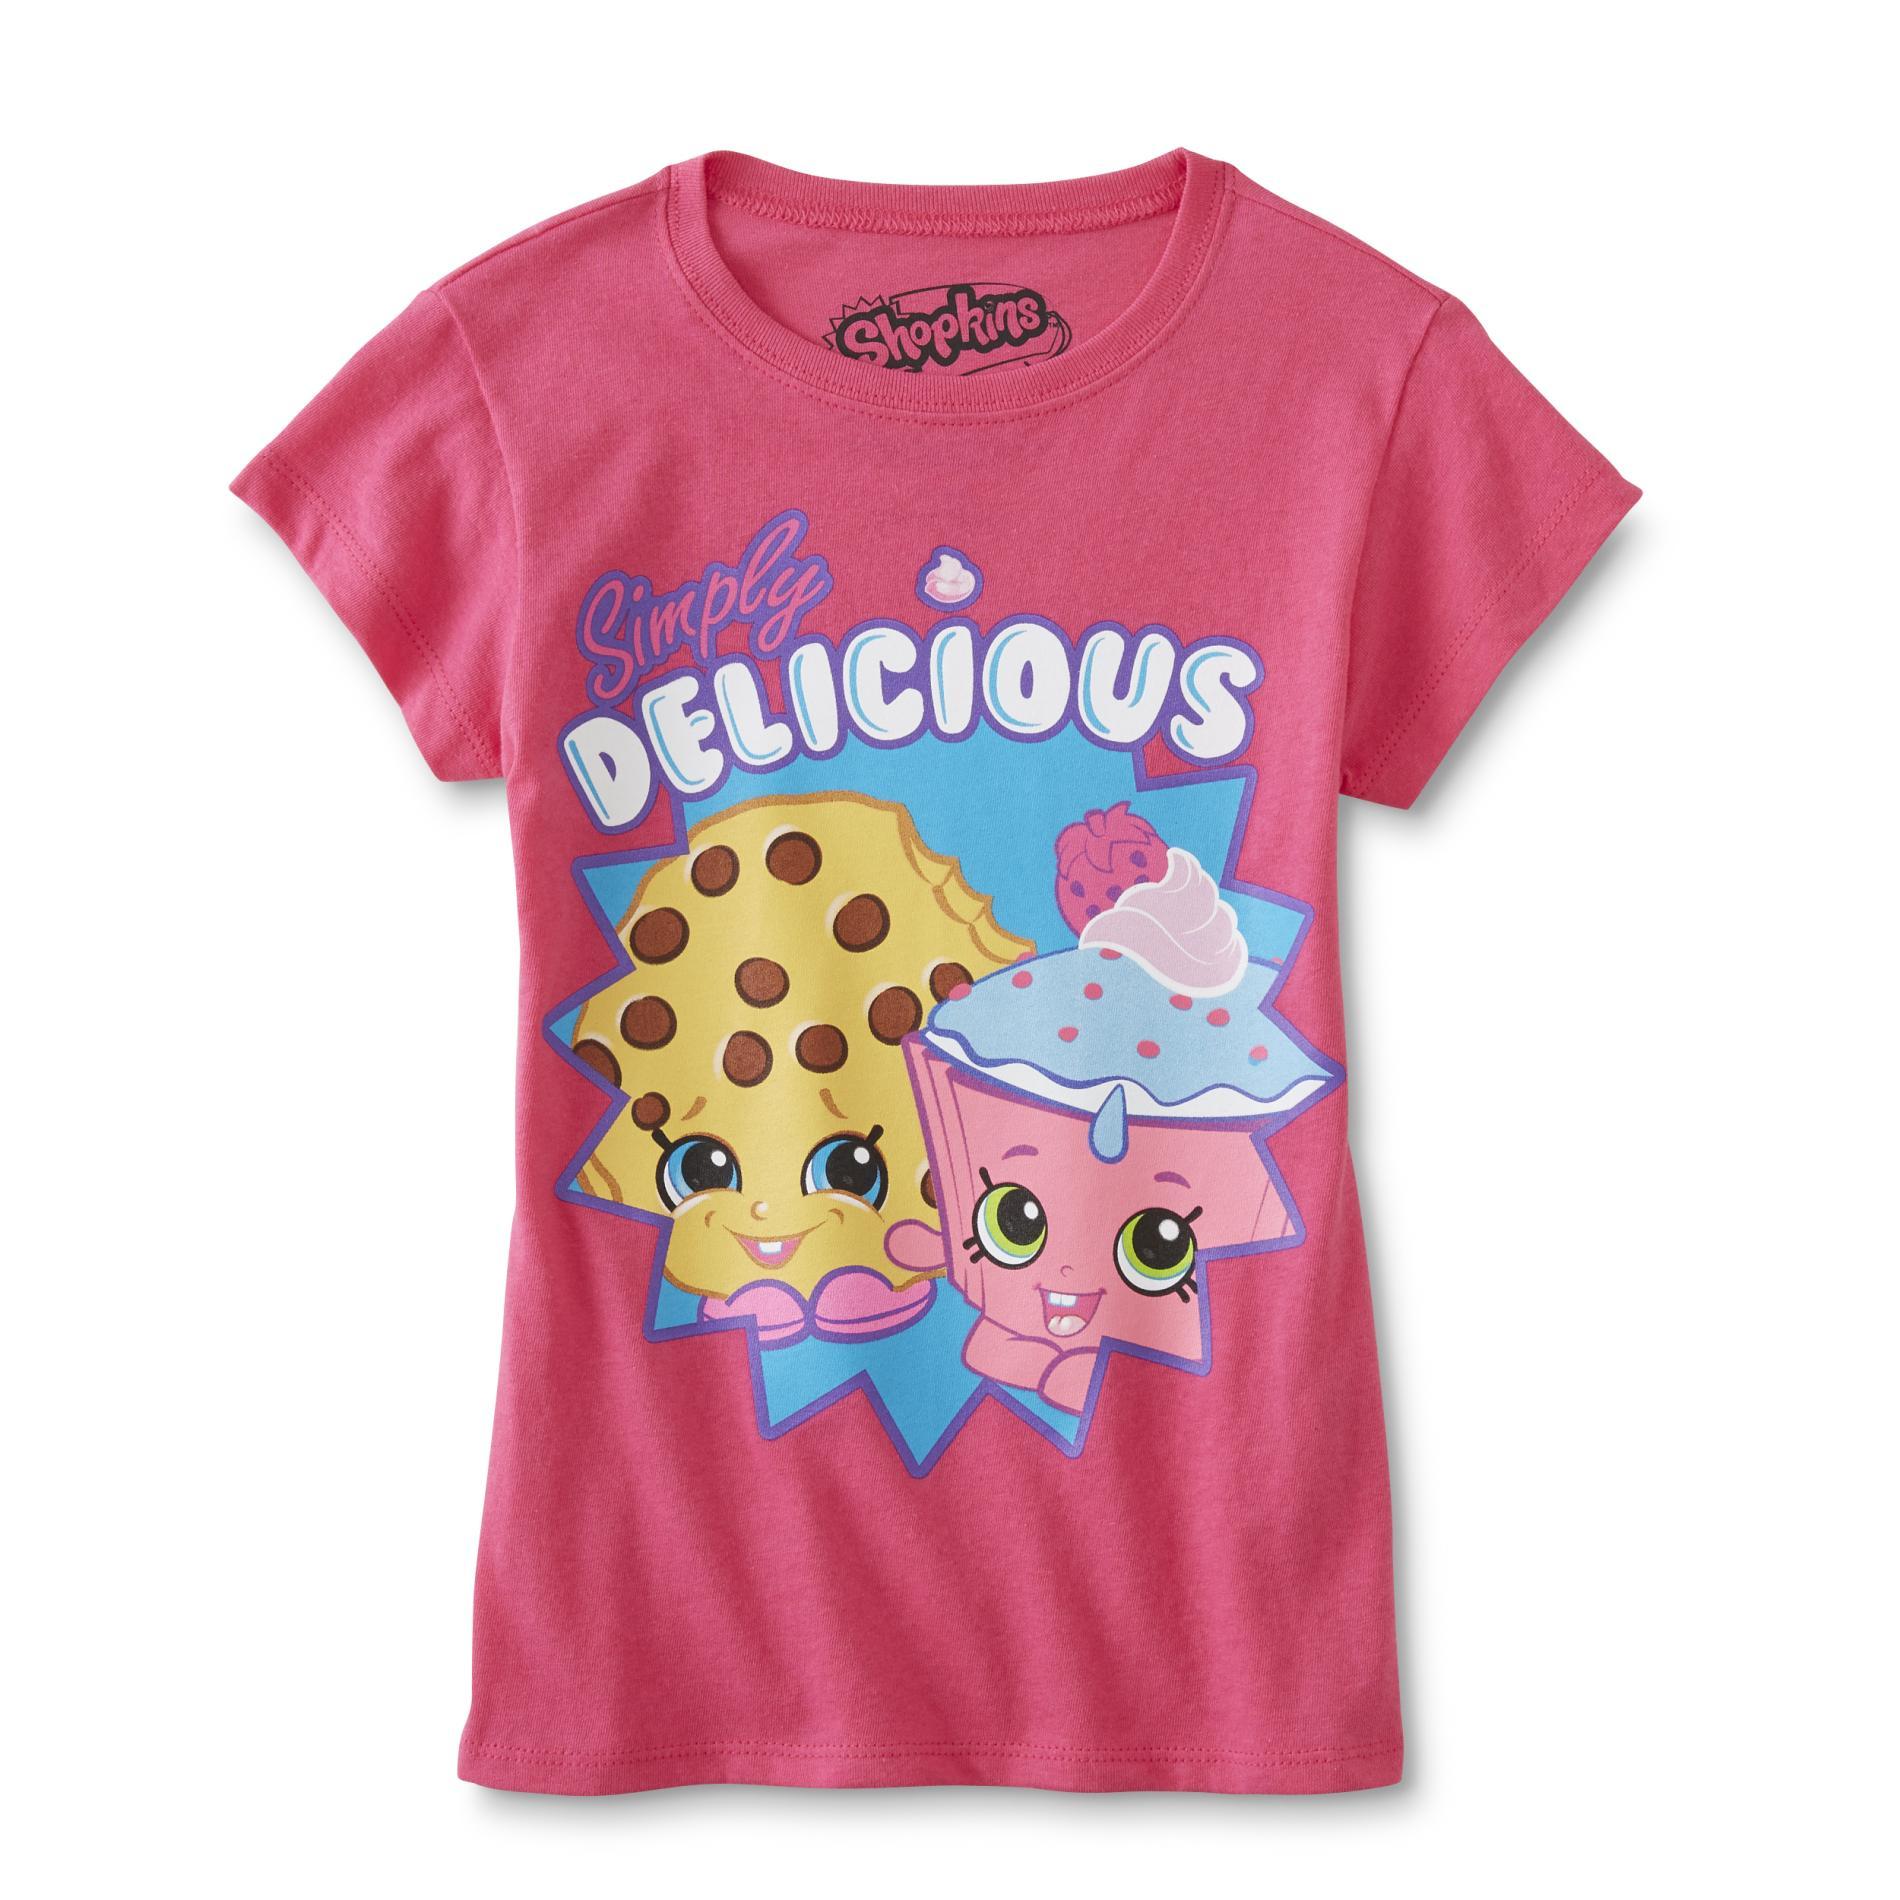 Shopkins Girl's Graphic T-Shirt - Simply Delicious